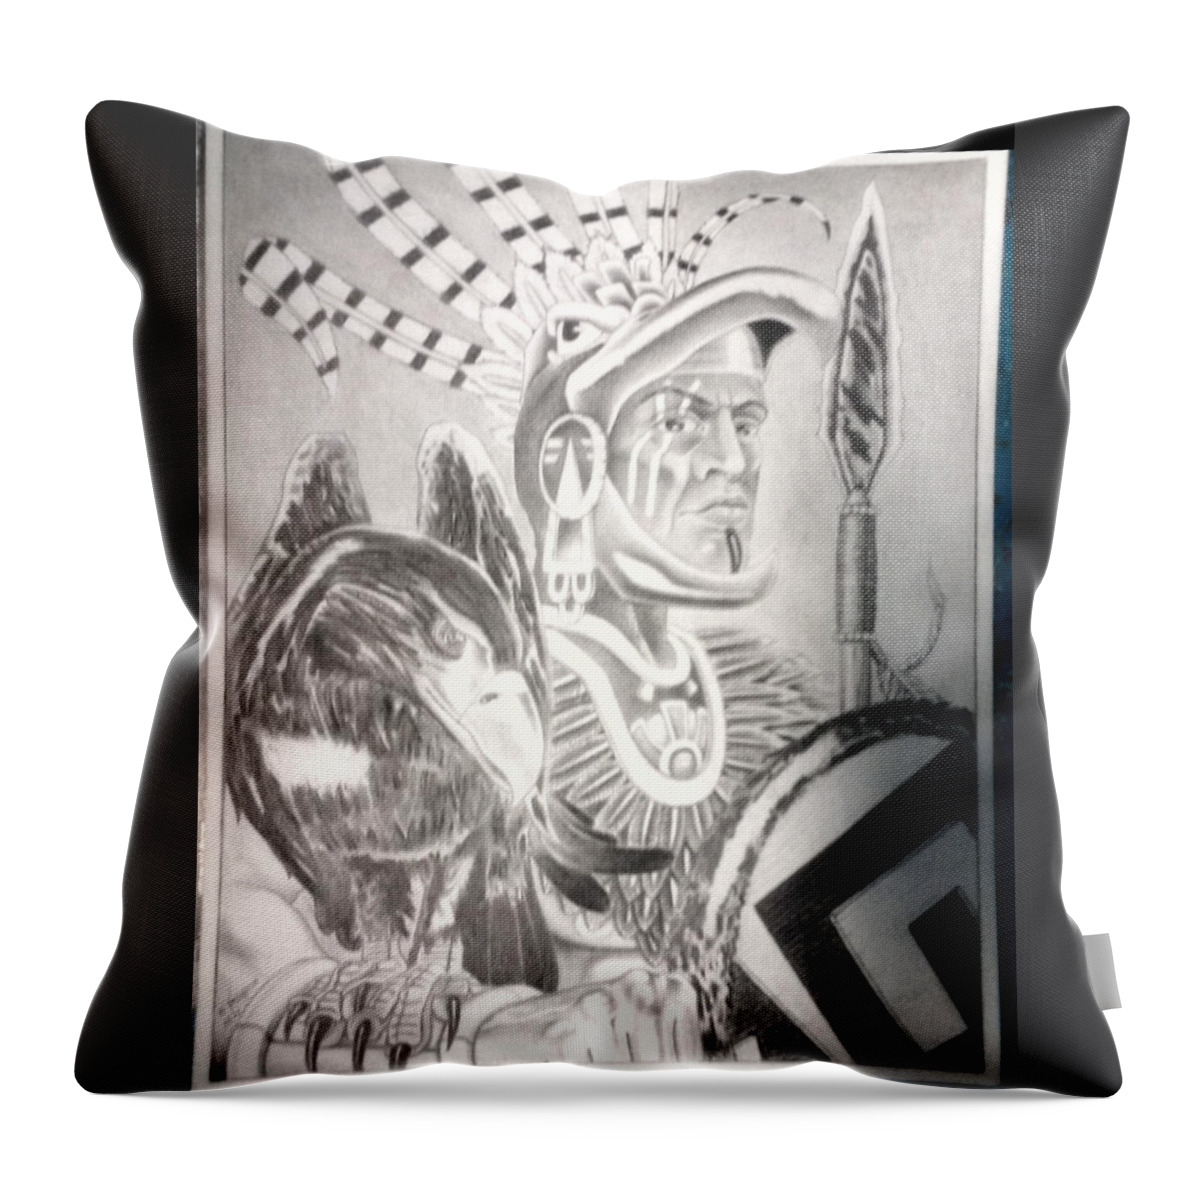 Mexican American Art Throw Pillow featuring the drawing Untitled by Joseph Lil Man Valencia